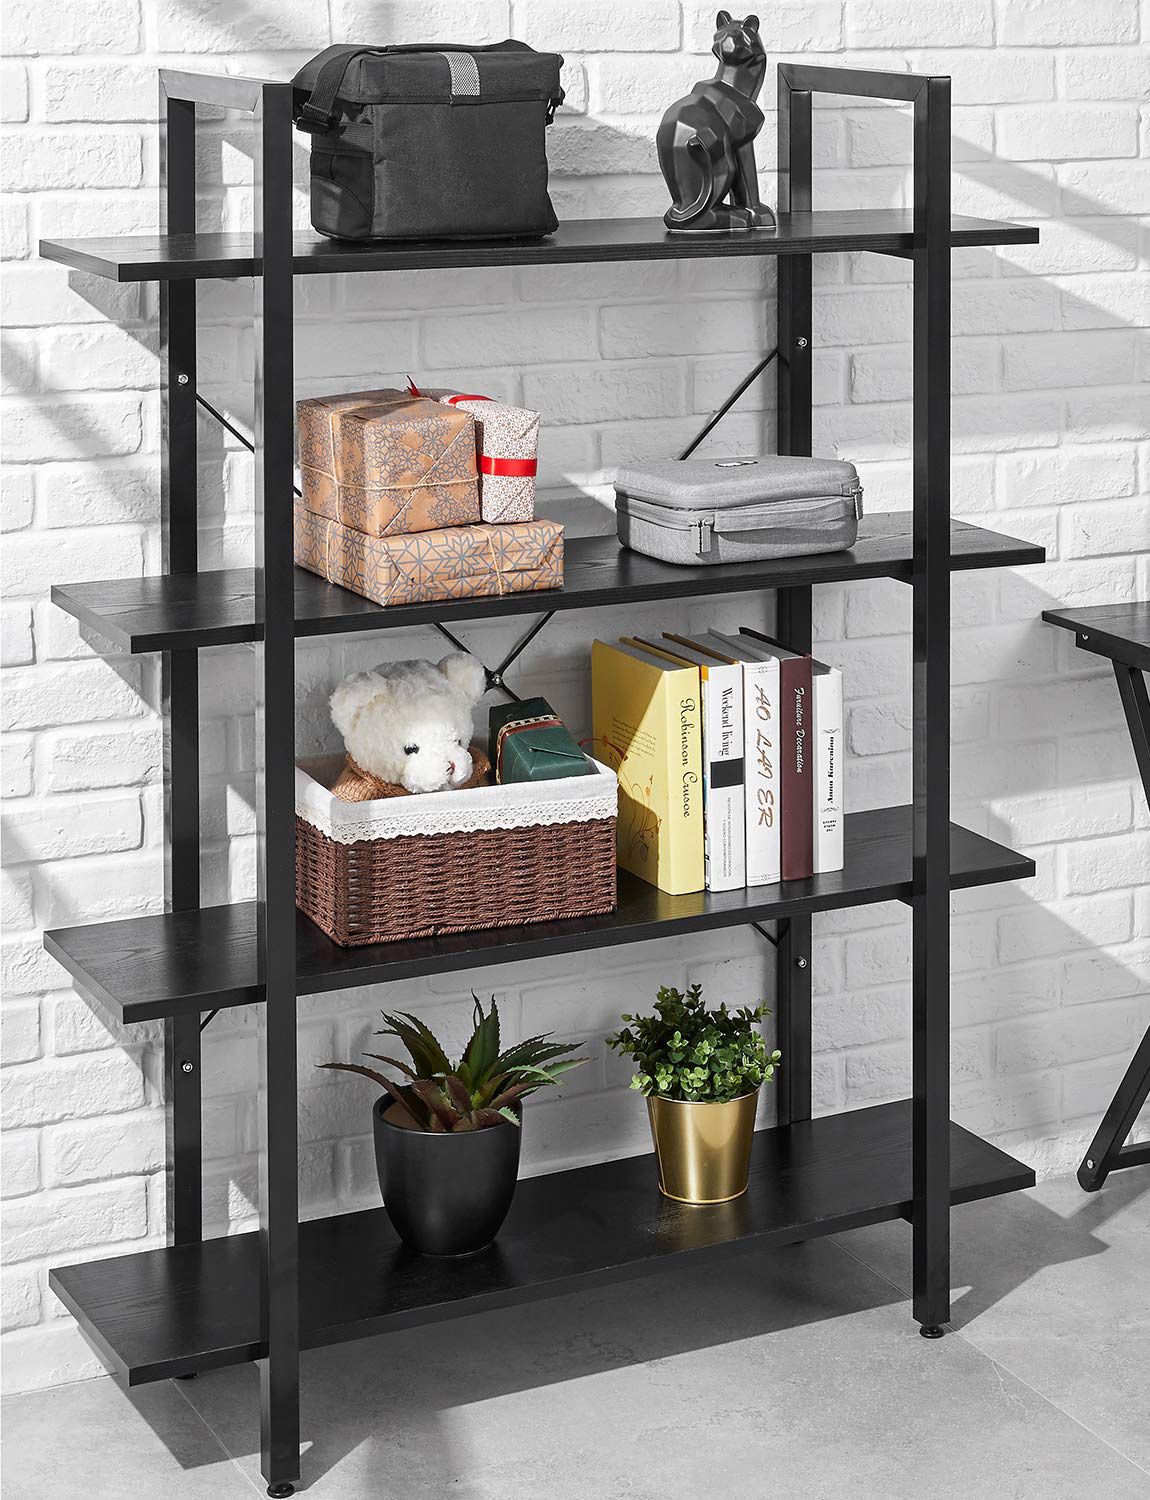 4 Tier Bookcase Solid 130lbs Load Capacity Industrial Bookshelf, Sturdy Bookshelves with Steel Frame, Storage Organizer Home Office Shelf BLACK